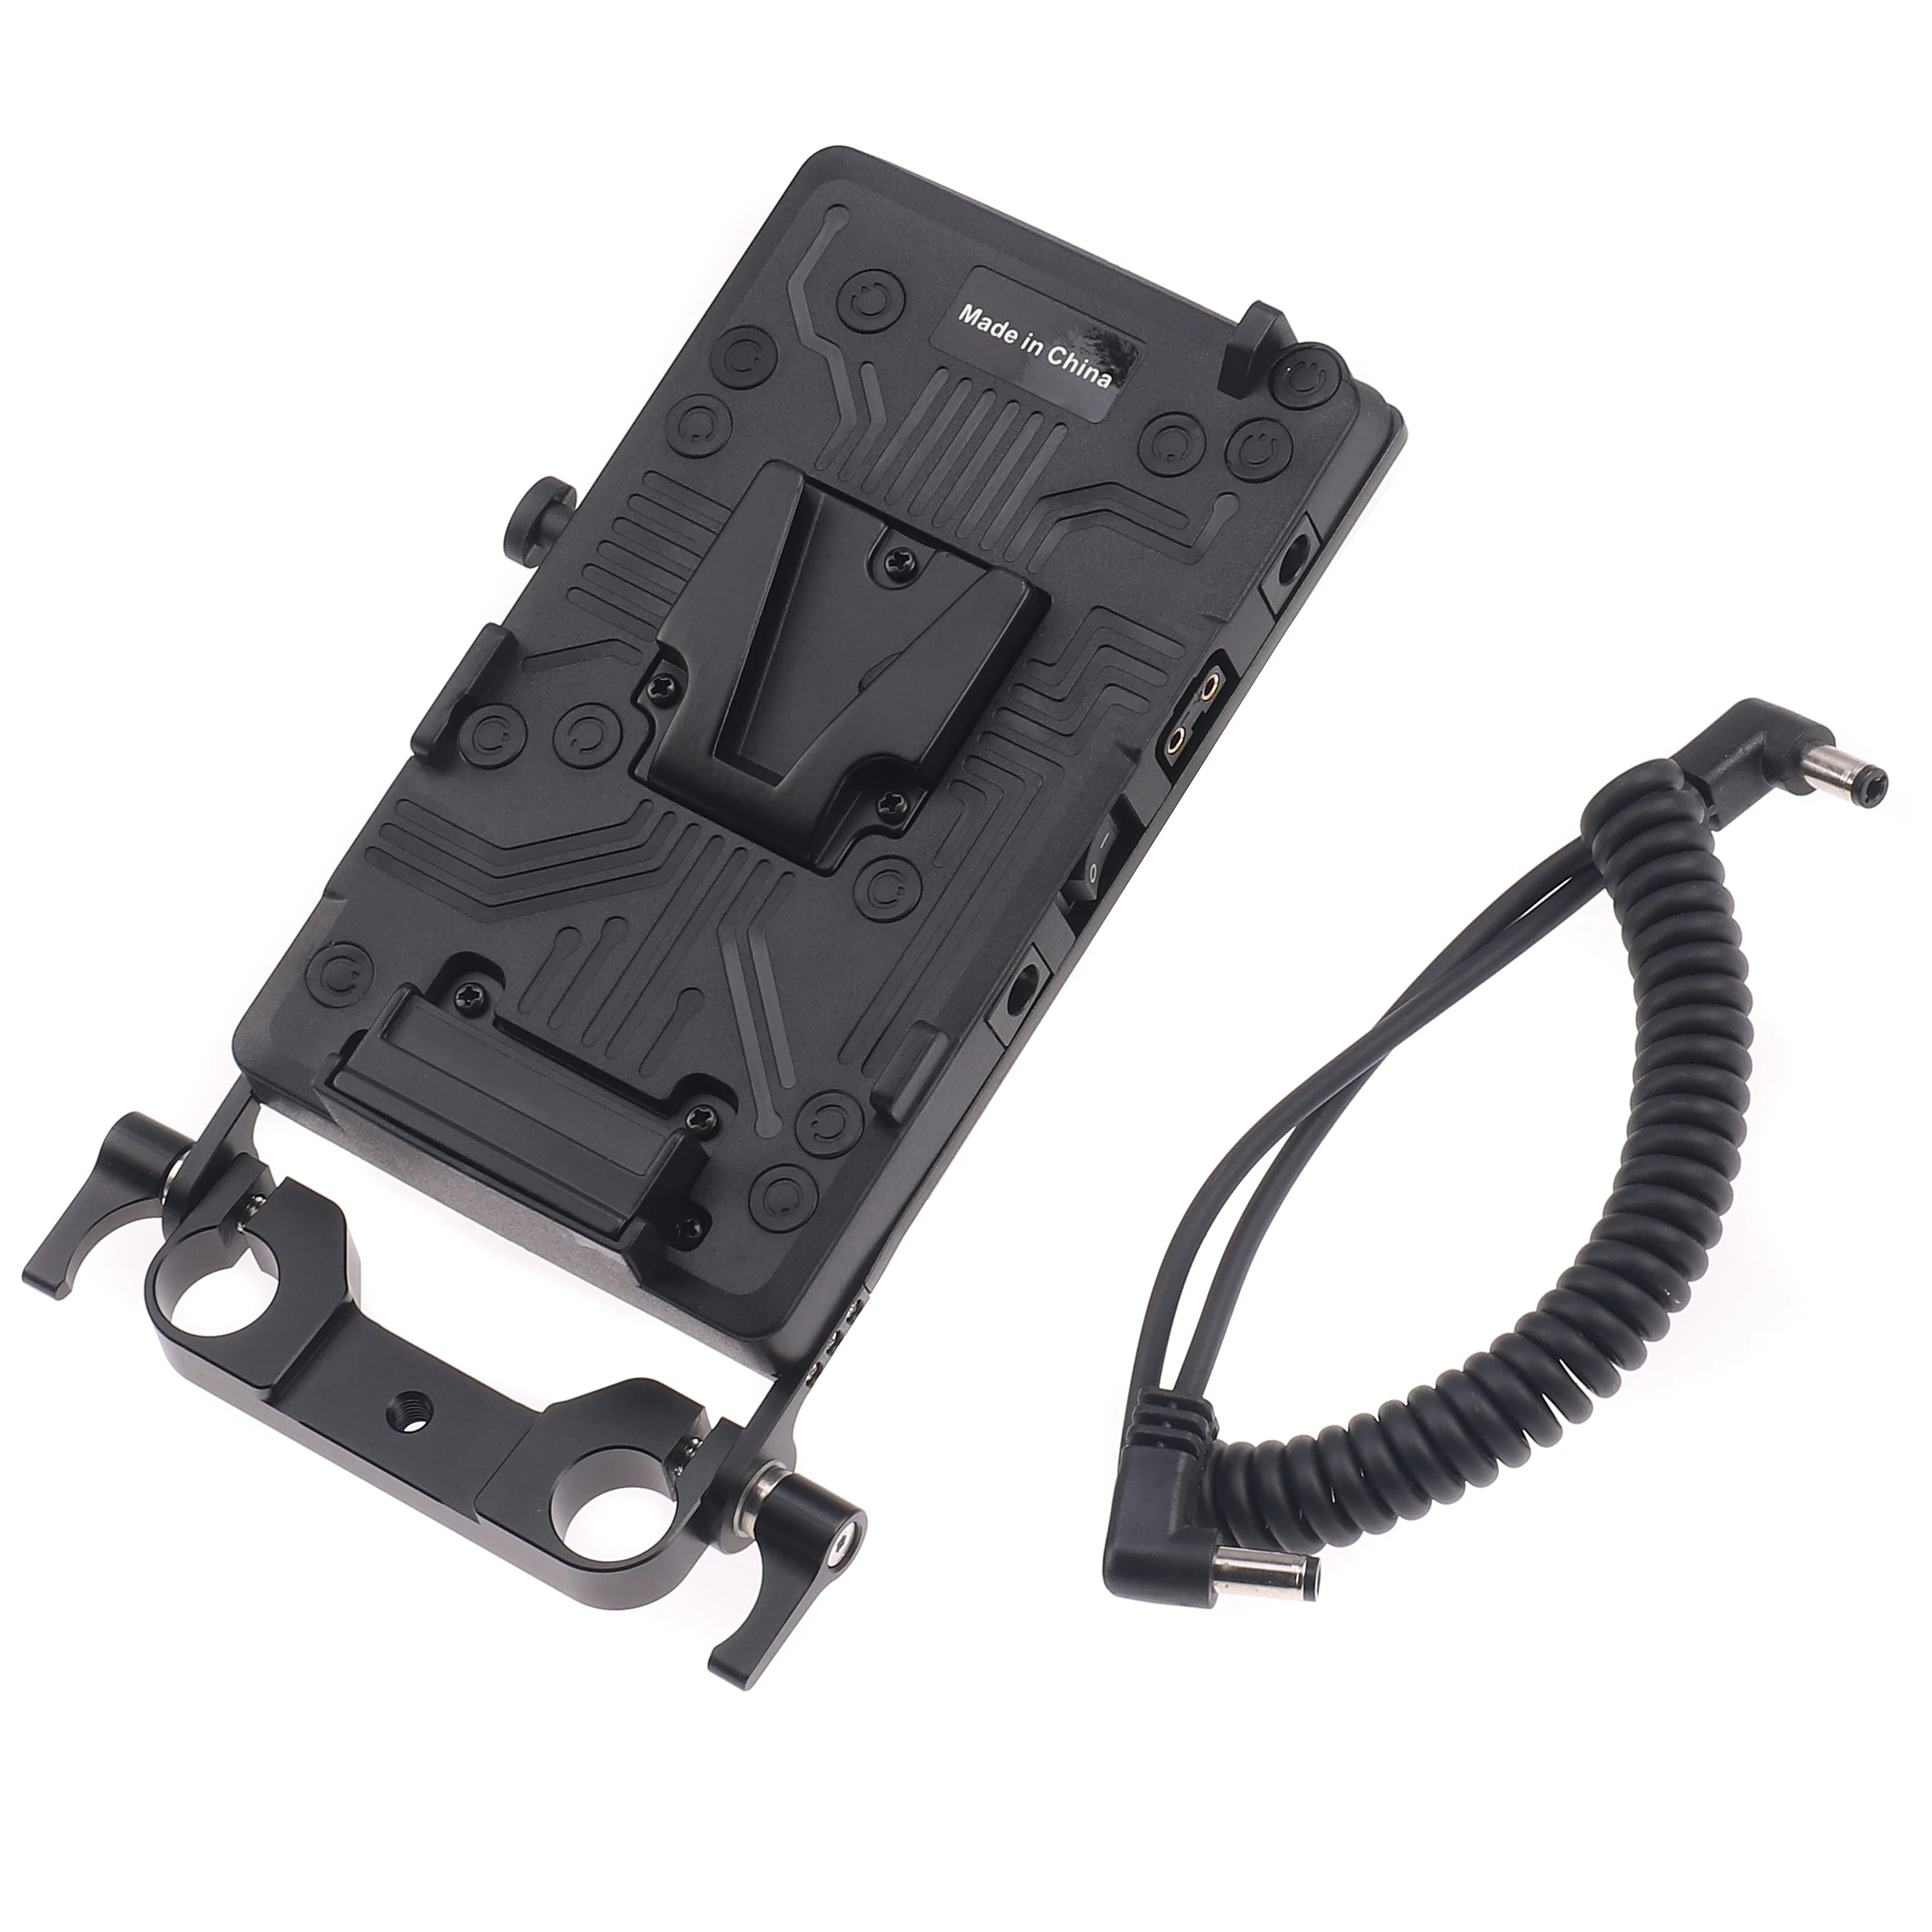 Enlarge WY-VG1 Power Supply Systerm V-Mount Battery Plate Adapter D-tap Plate for Broadcast SLR HD Camera